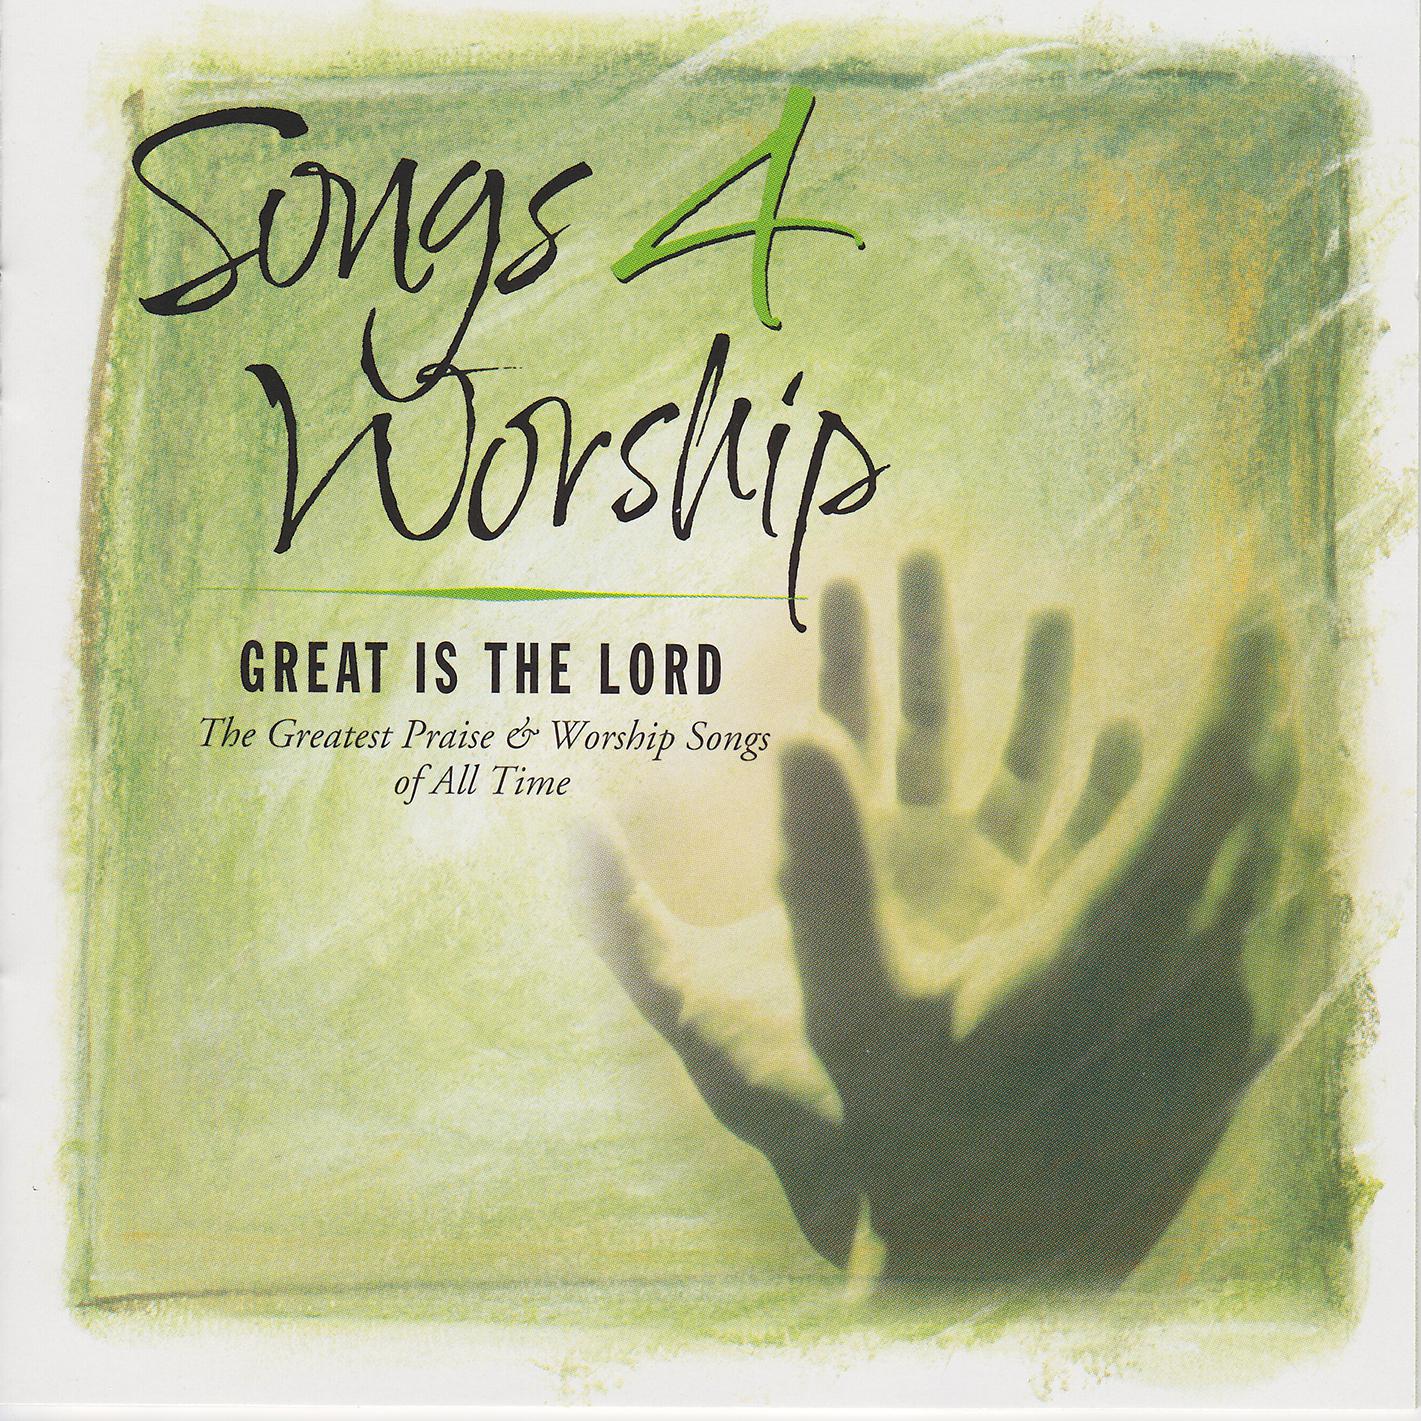 Songs 4 Worship: Great Is the Lord